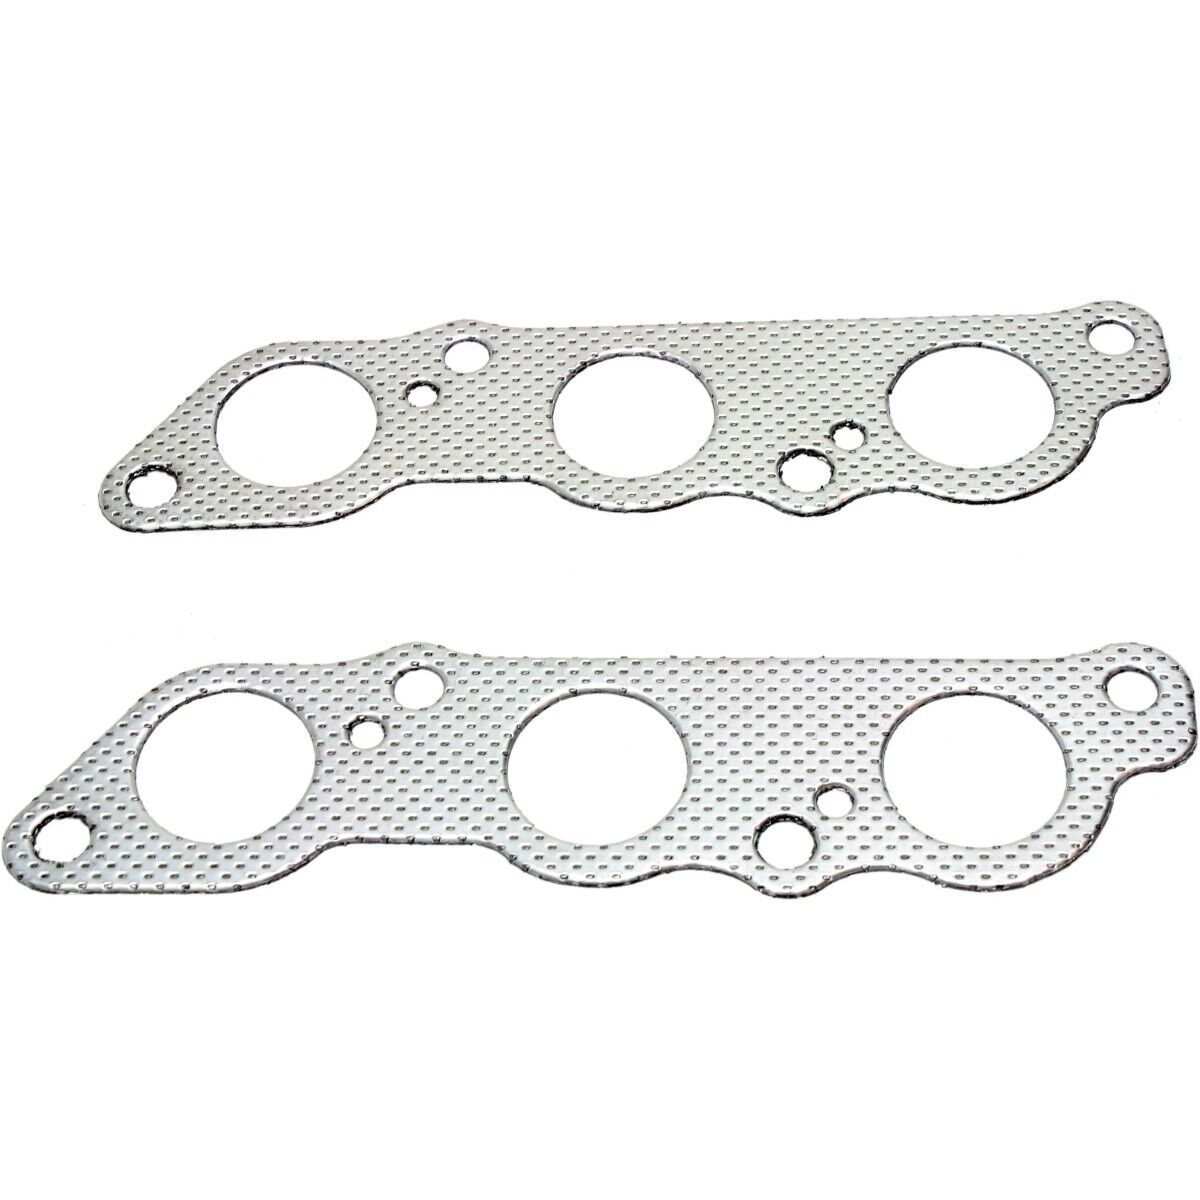 MS 96686 Felpro Exhaust Manifold Gaskets Set for Lexus IS300 GS300 Toyota Supra